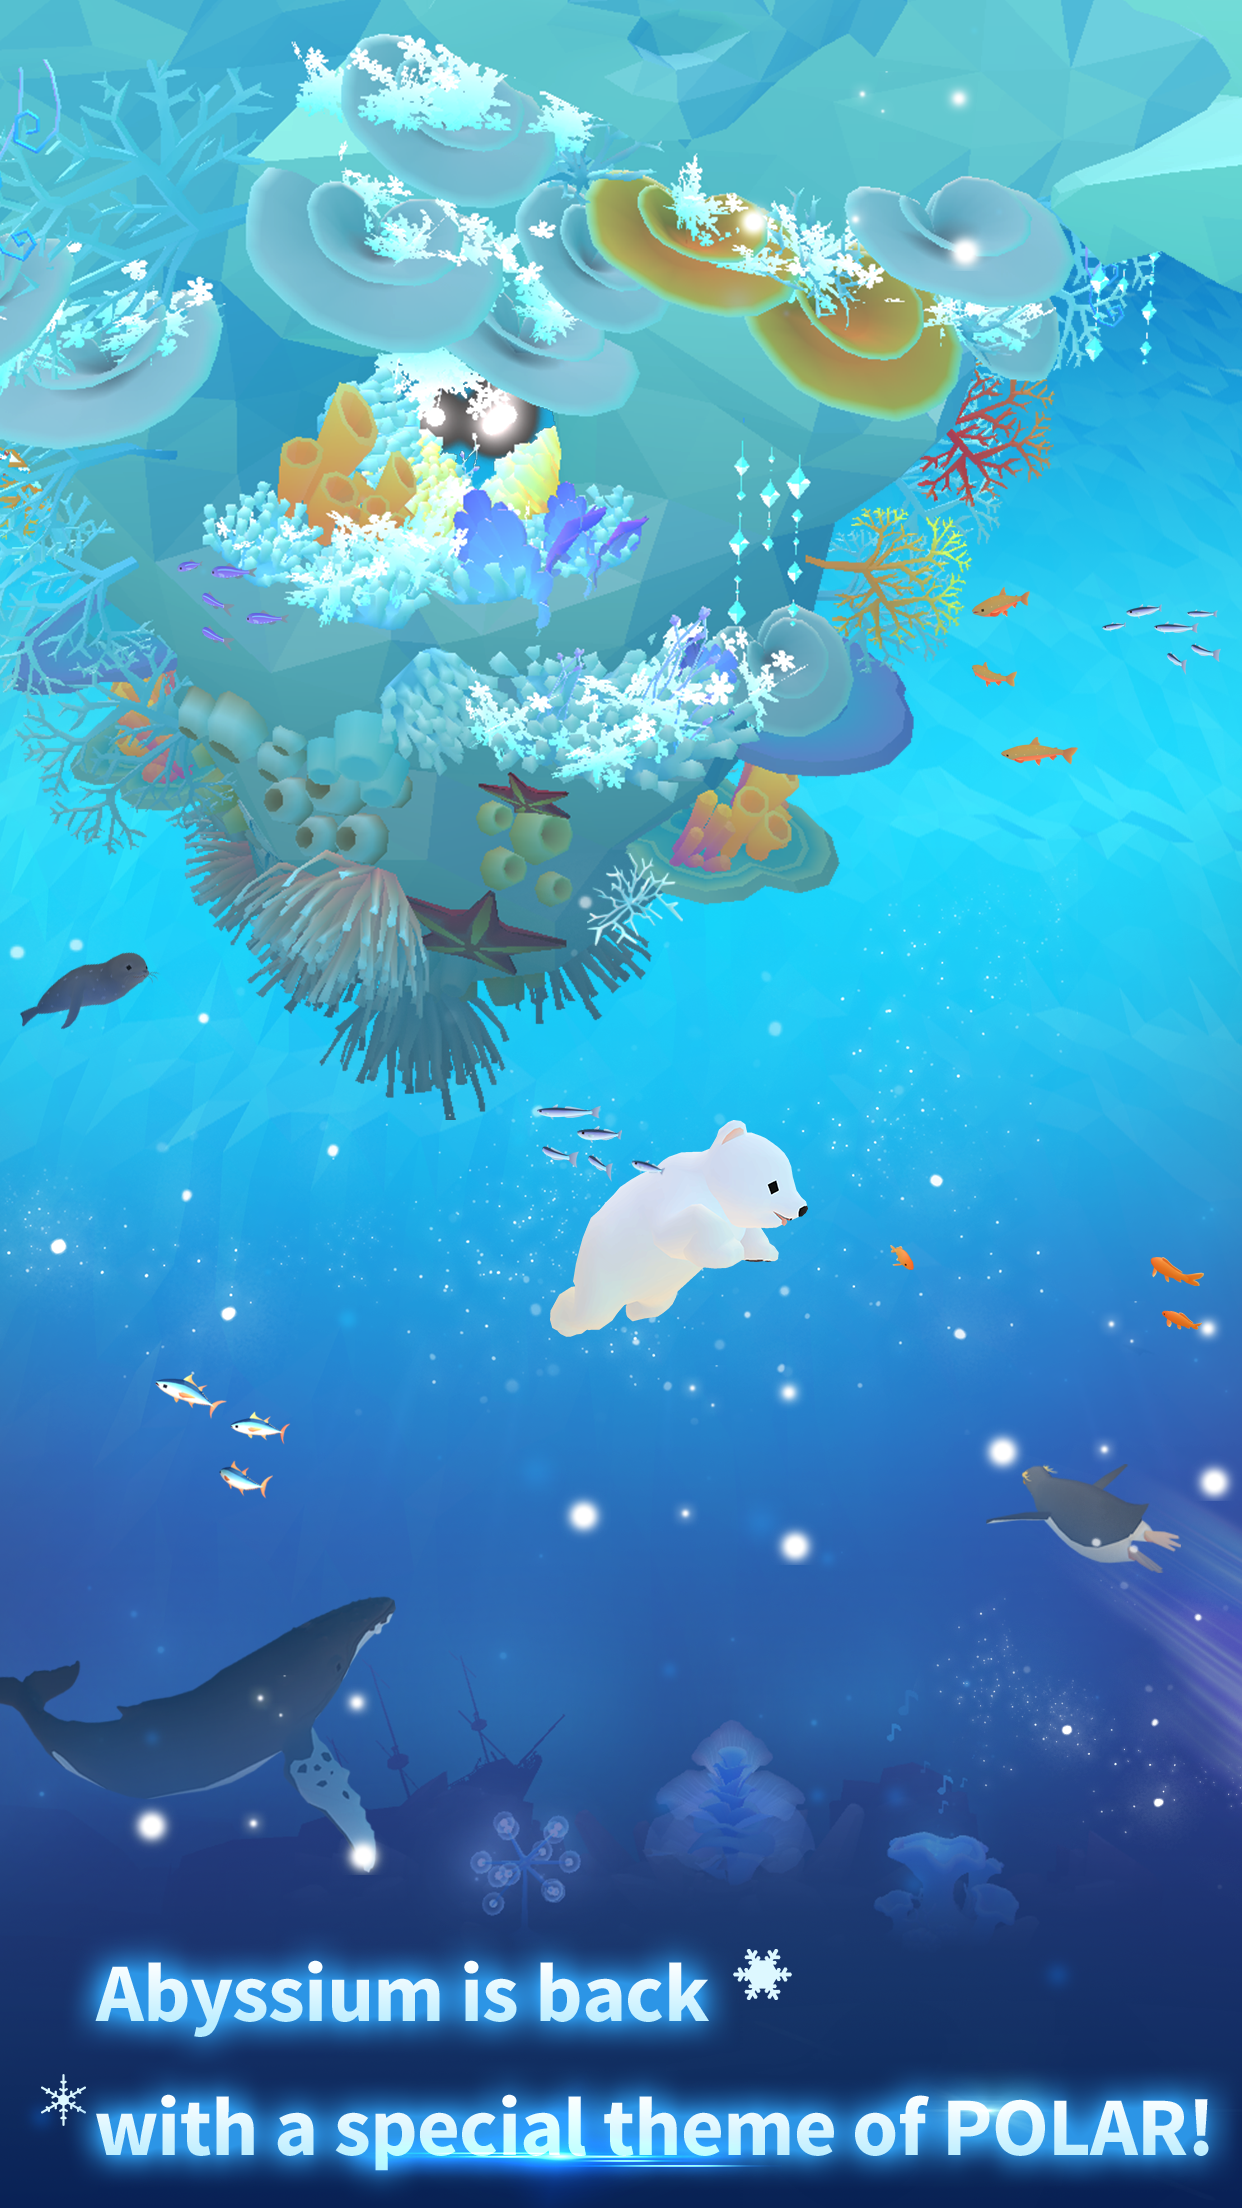 Screenshot 1 of I-tap ang Tap Fish - Abyssrium Pole 1.18.4